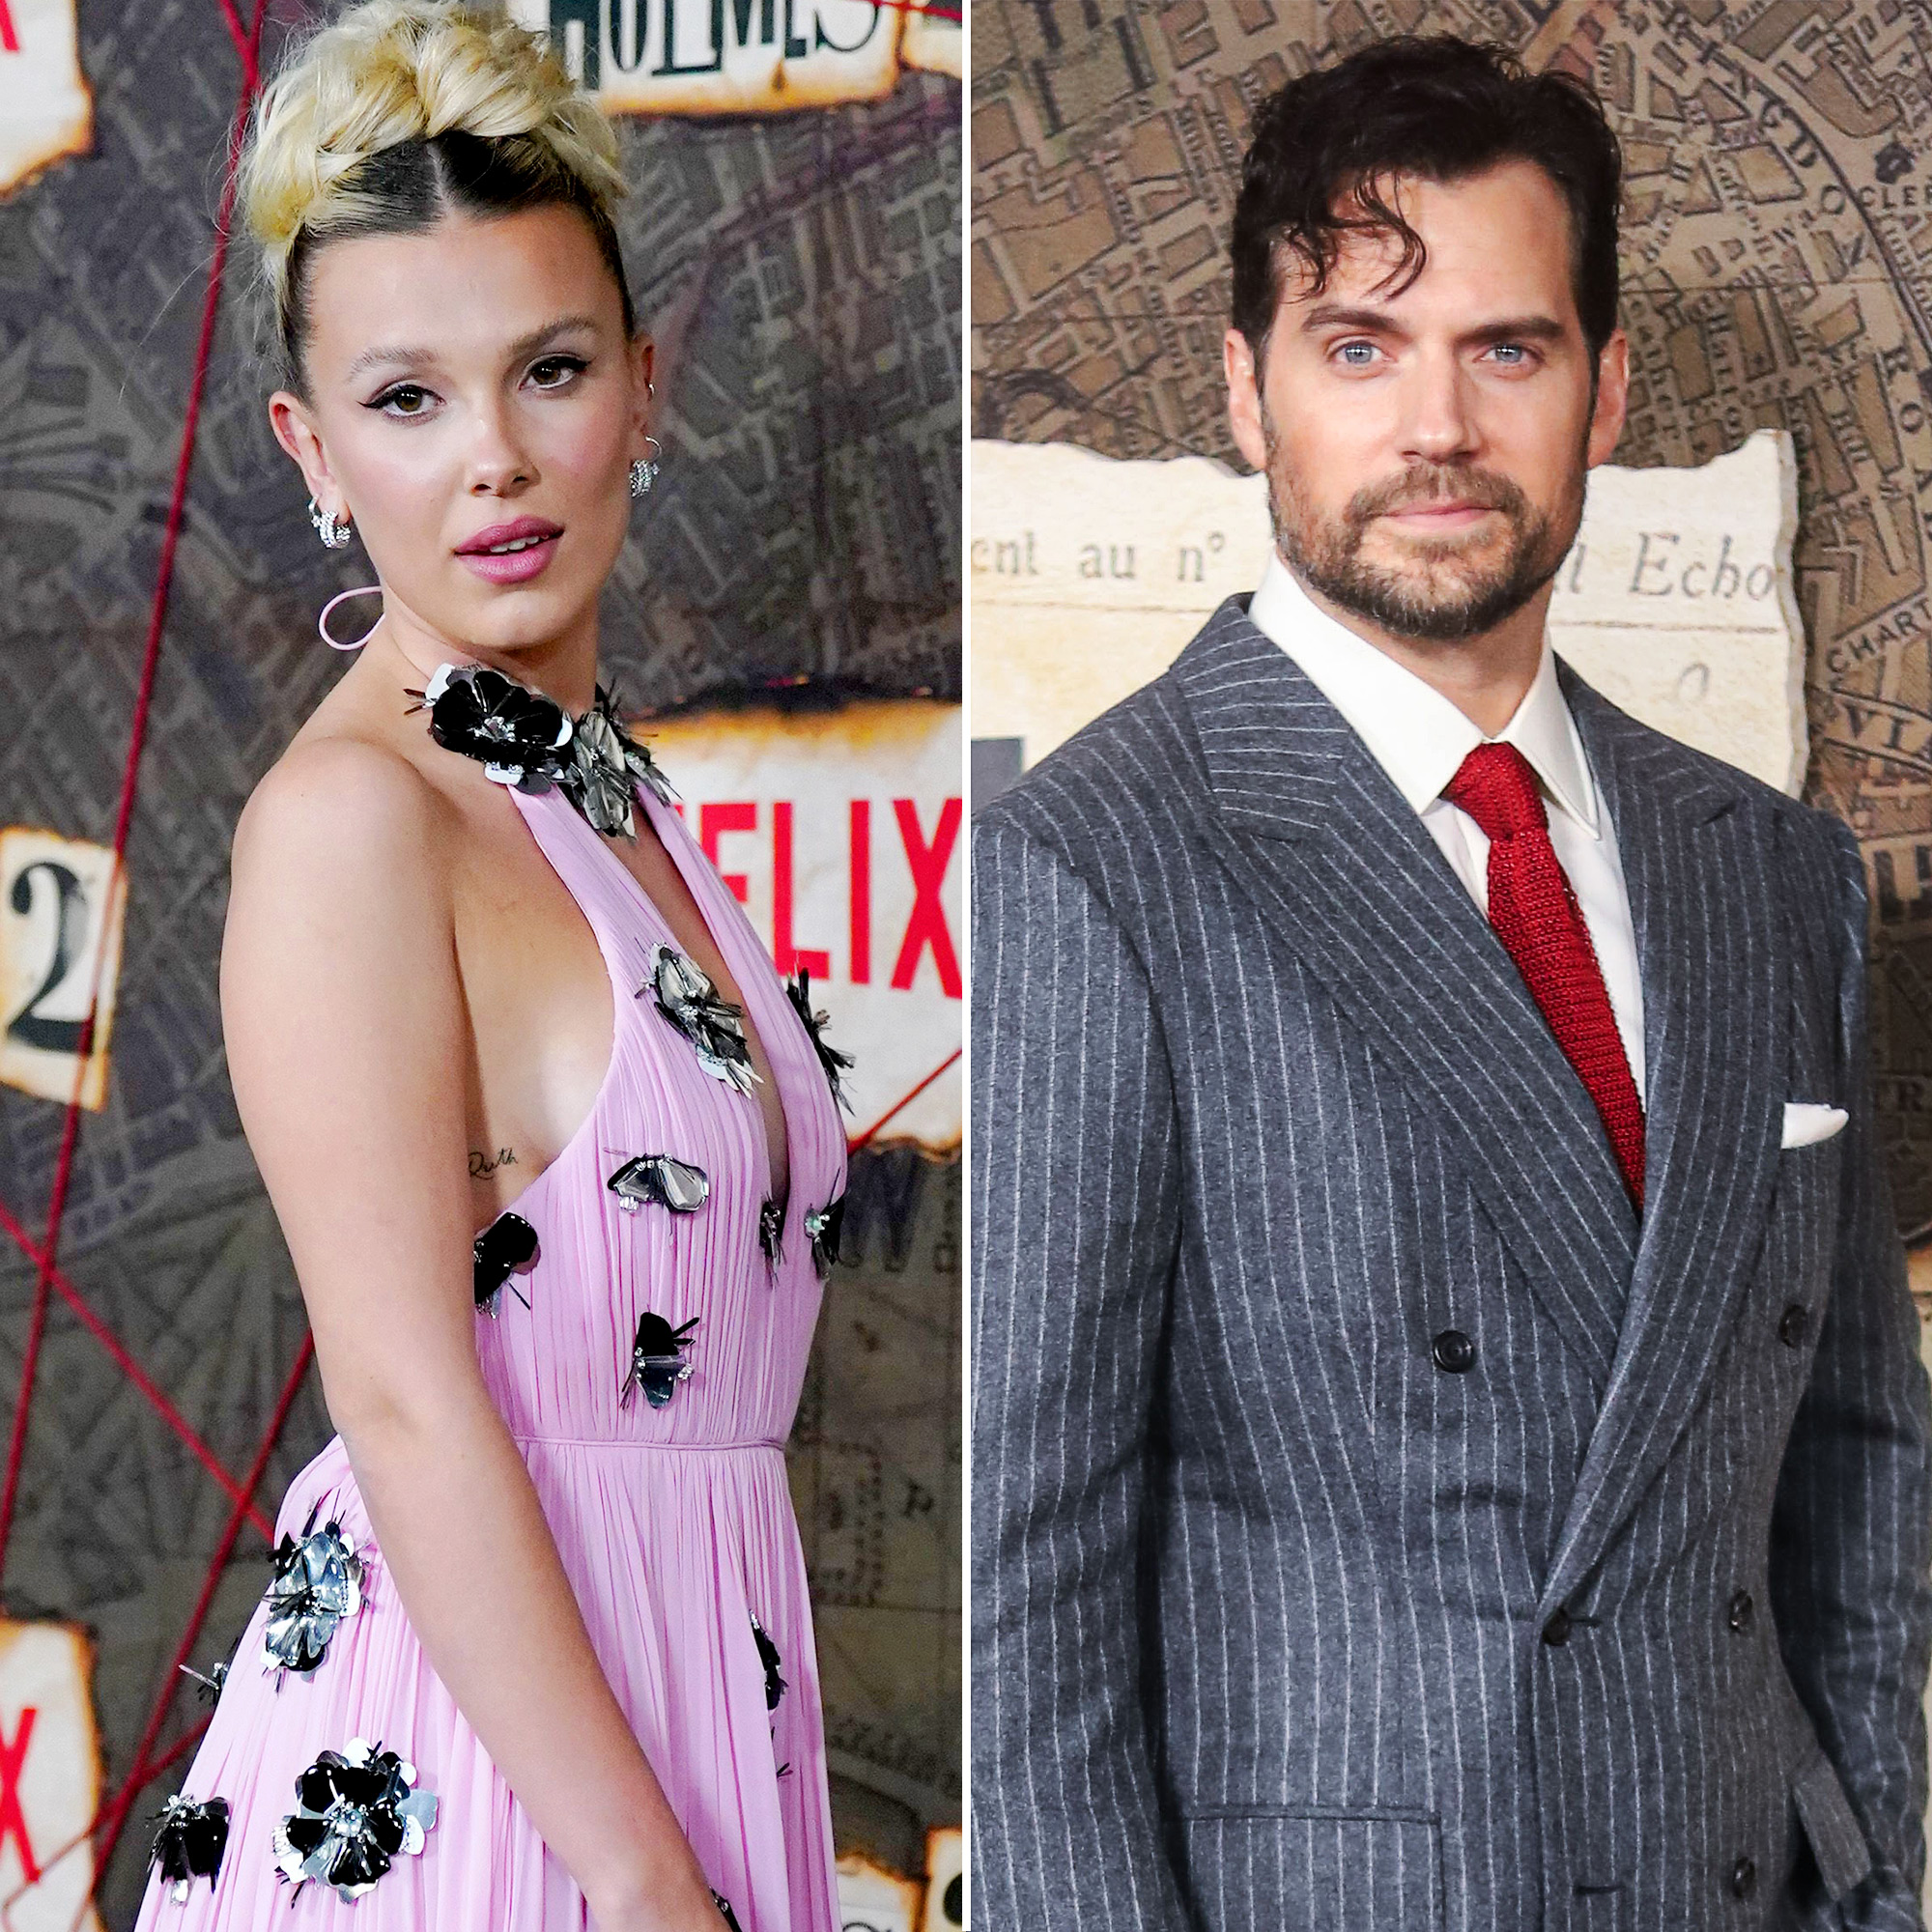 Millie Bobby Brown Details Adult Friendship With Henry Cavill